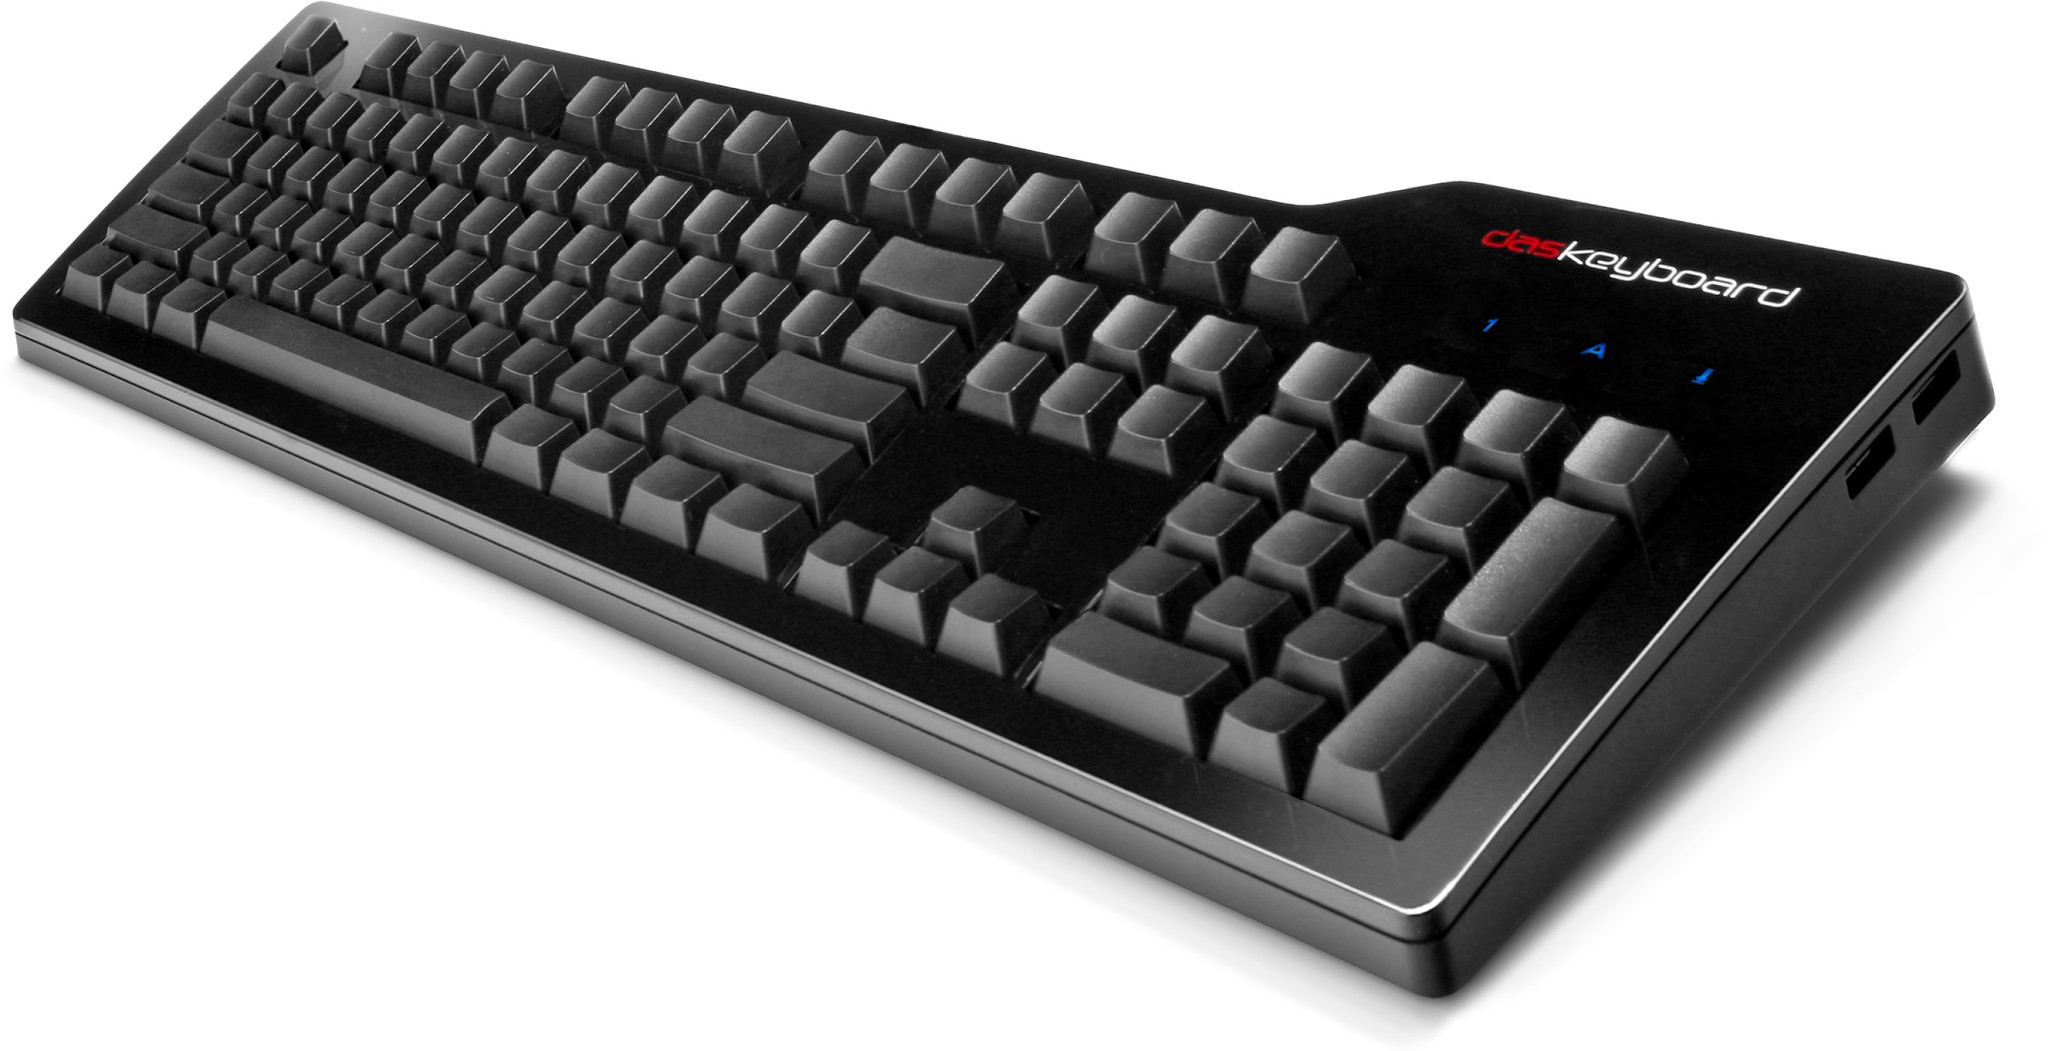 Why should you invest in a high quality keyboard?